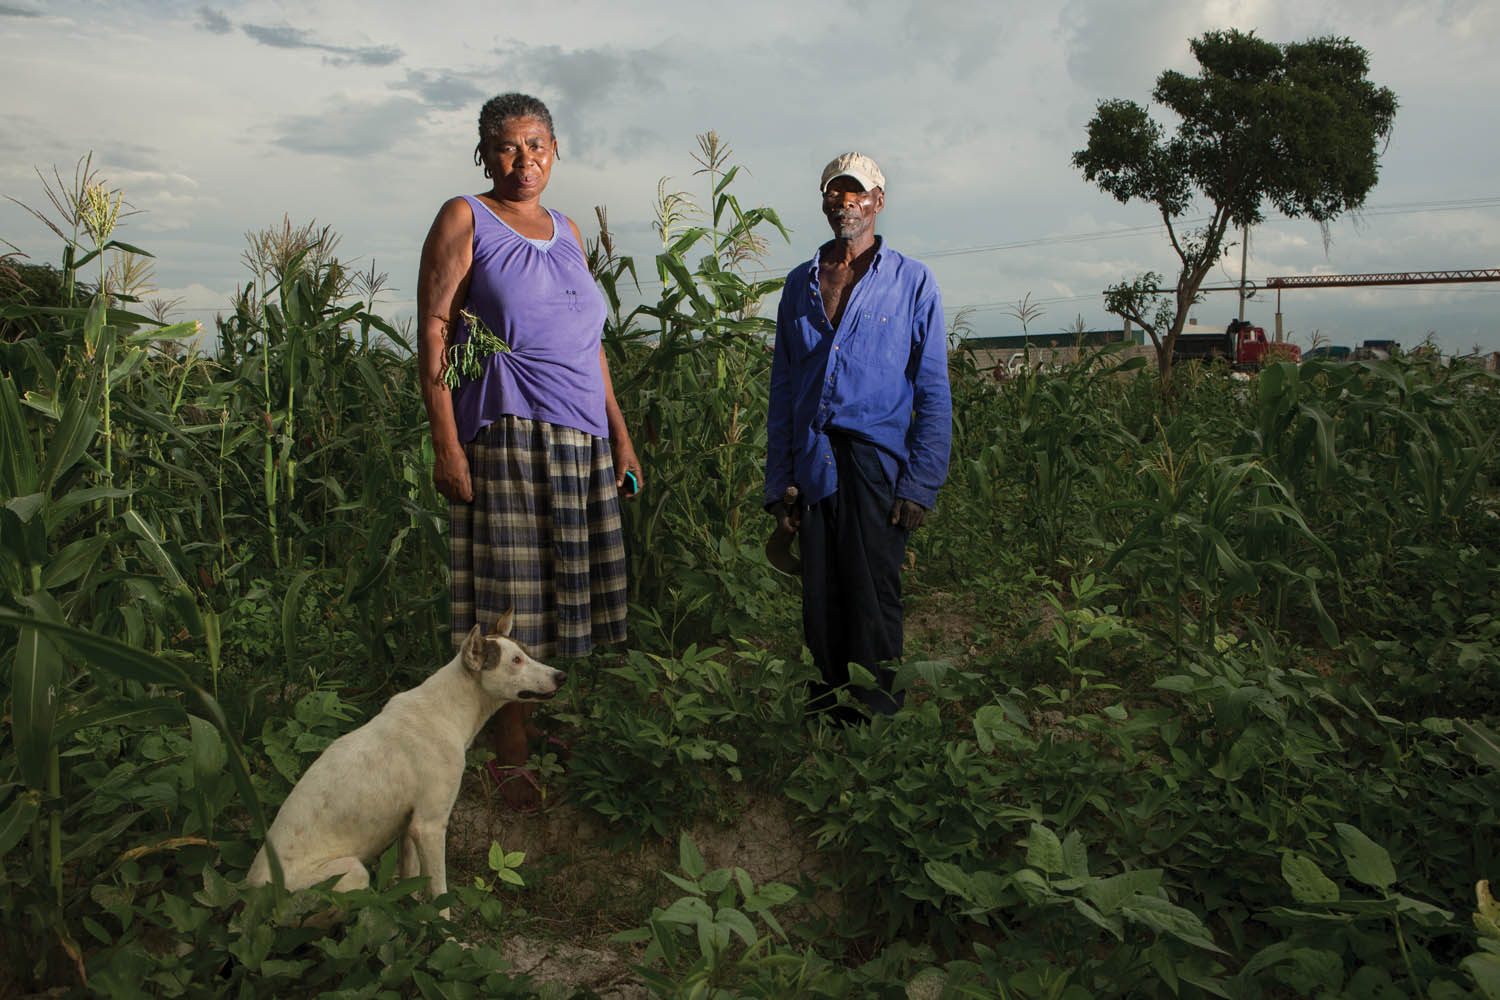 Jean Leon and her husband, Michelet Alexandre, in their field near Corail. They arrived in 1996, when there were only three families in the area. Now their property, where they grow crops and raise cattle, is surrounded by a fast-developing neighborhood. “We came from the countryside to find life, and we certainly found life,” says Leon. Photo by Allison Shelley